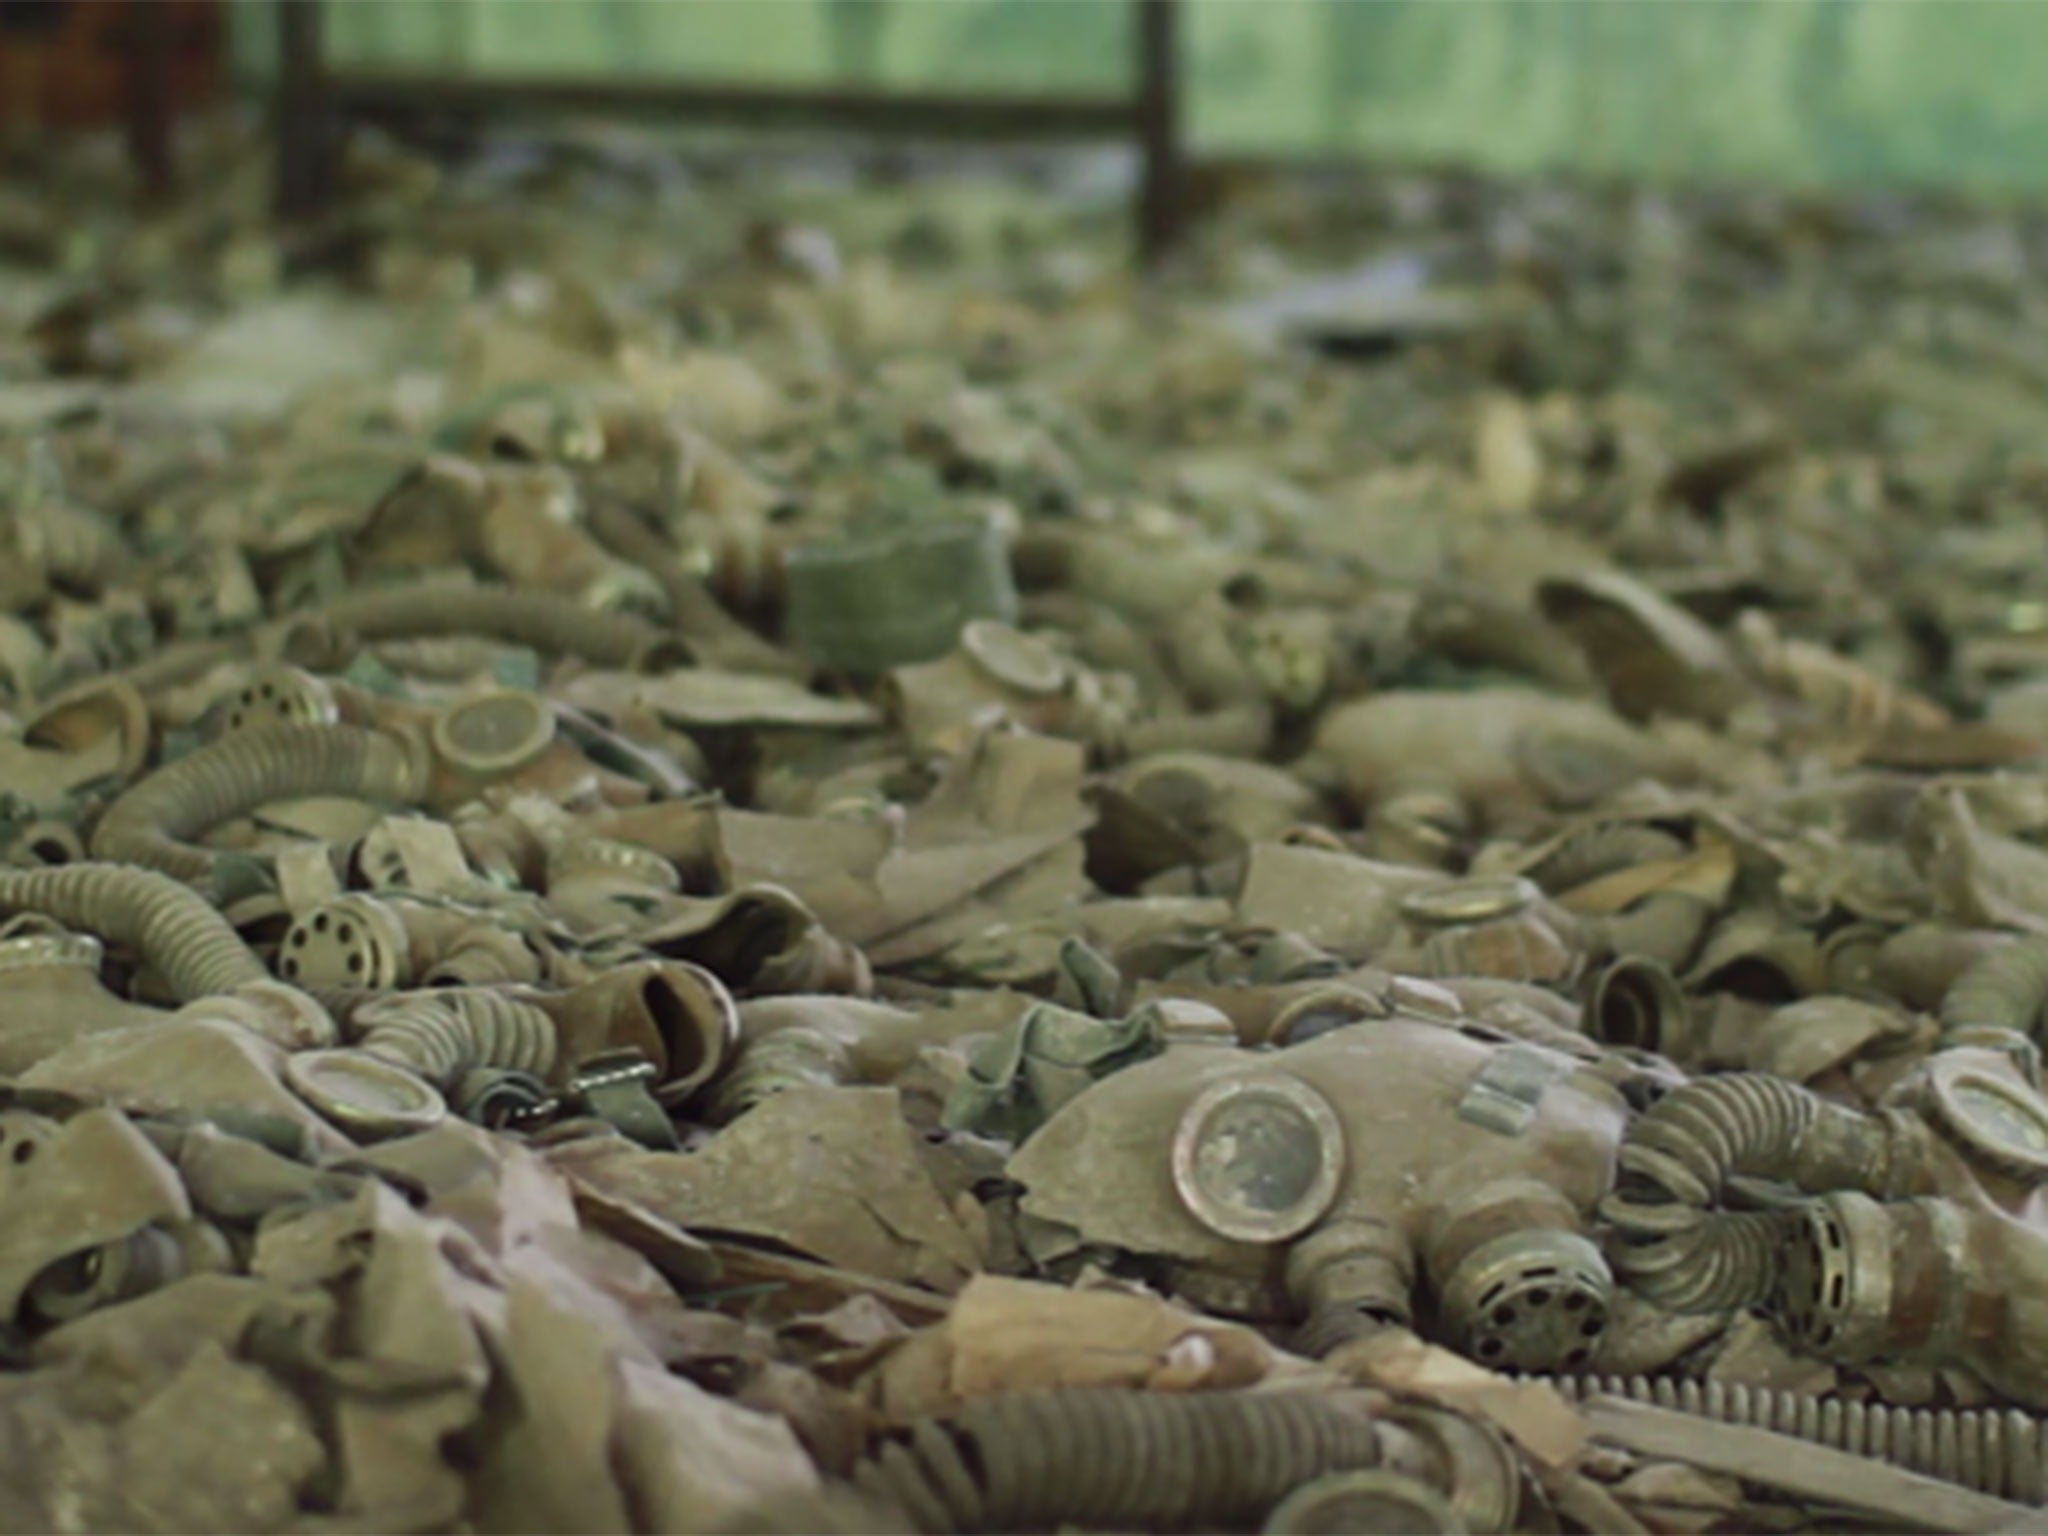 Pripyat was completely evacuated within days of the Chernobyl Disaster